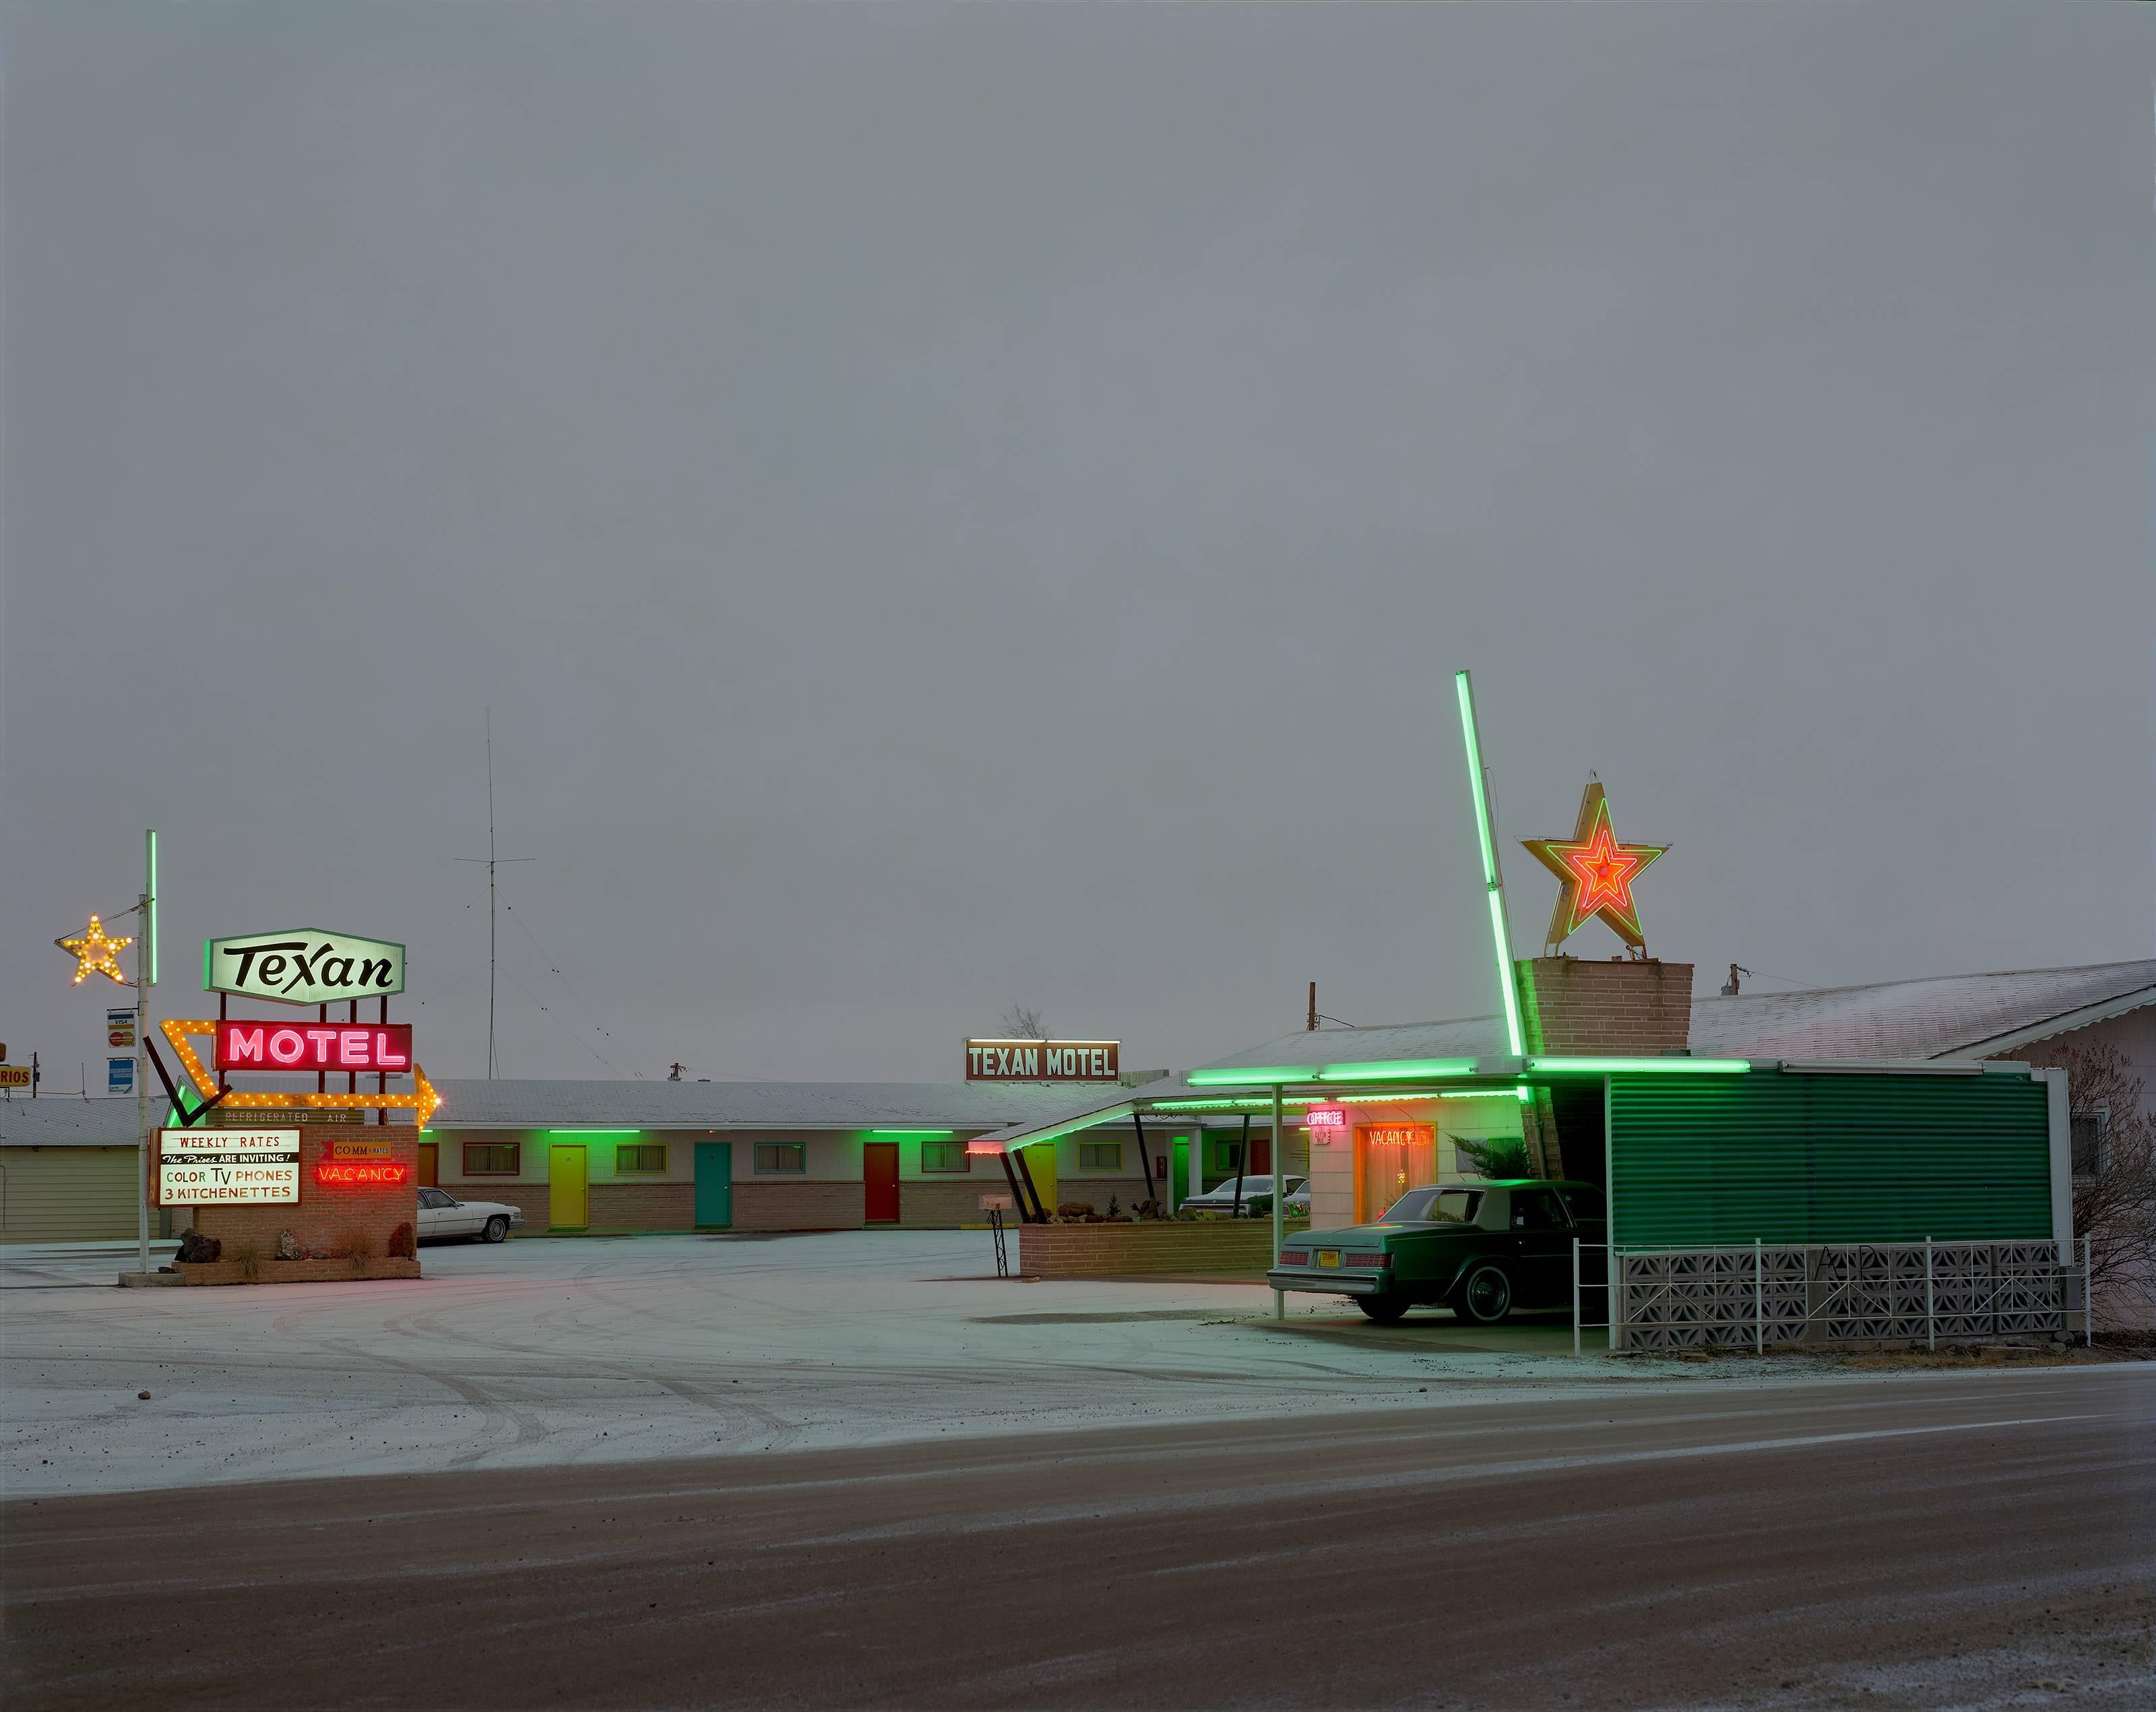 Steve Fitch Landscape Photograph - Texan Motel, Highway 64, Raton, New Mexico; December 19, 1980